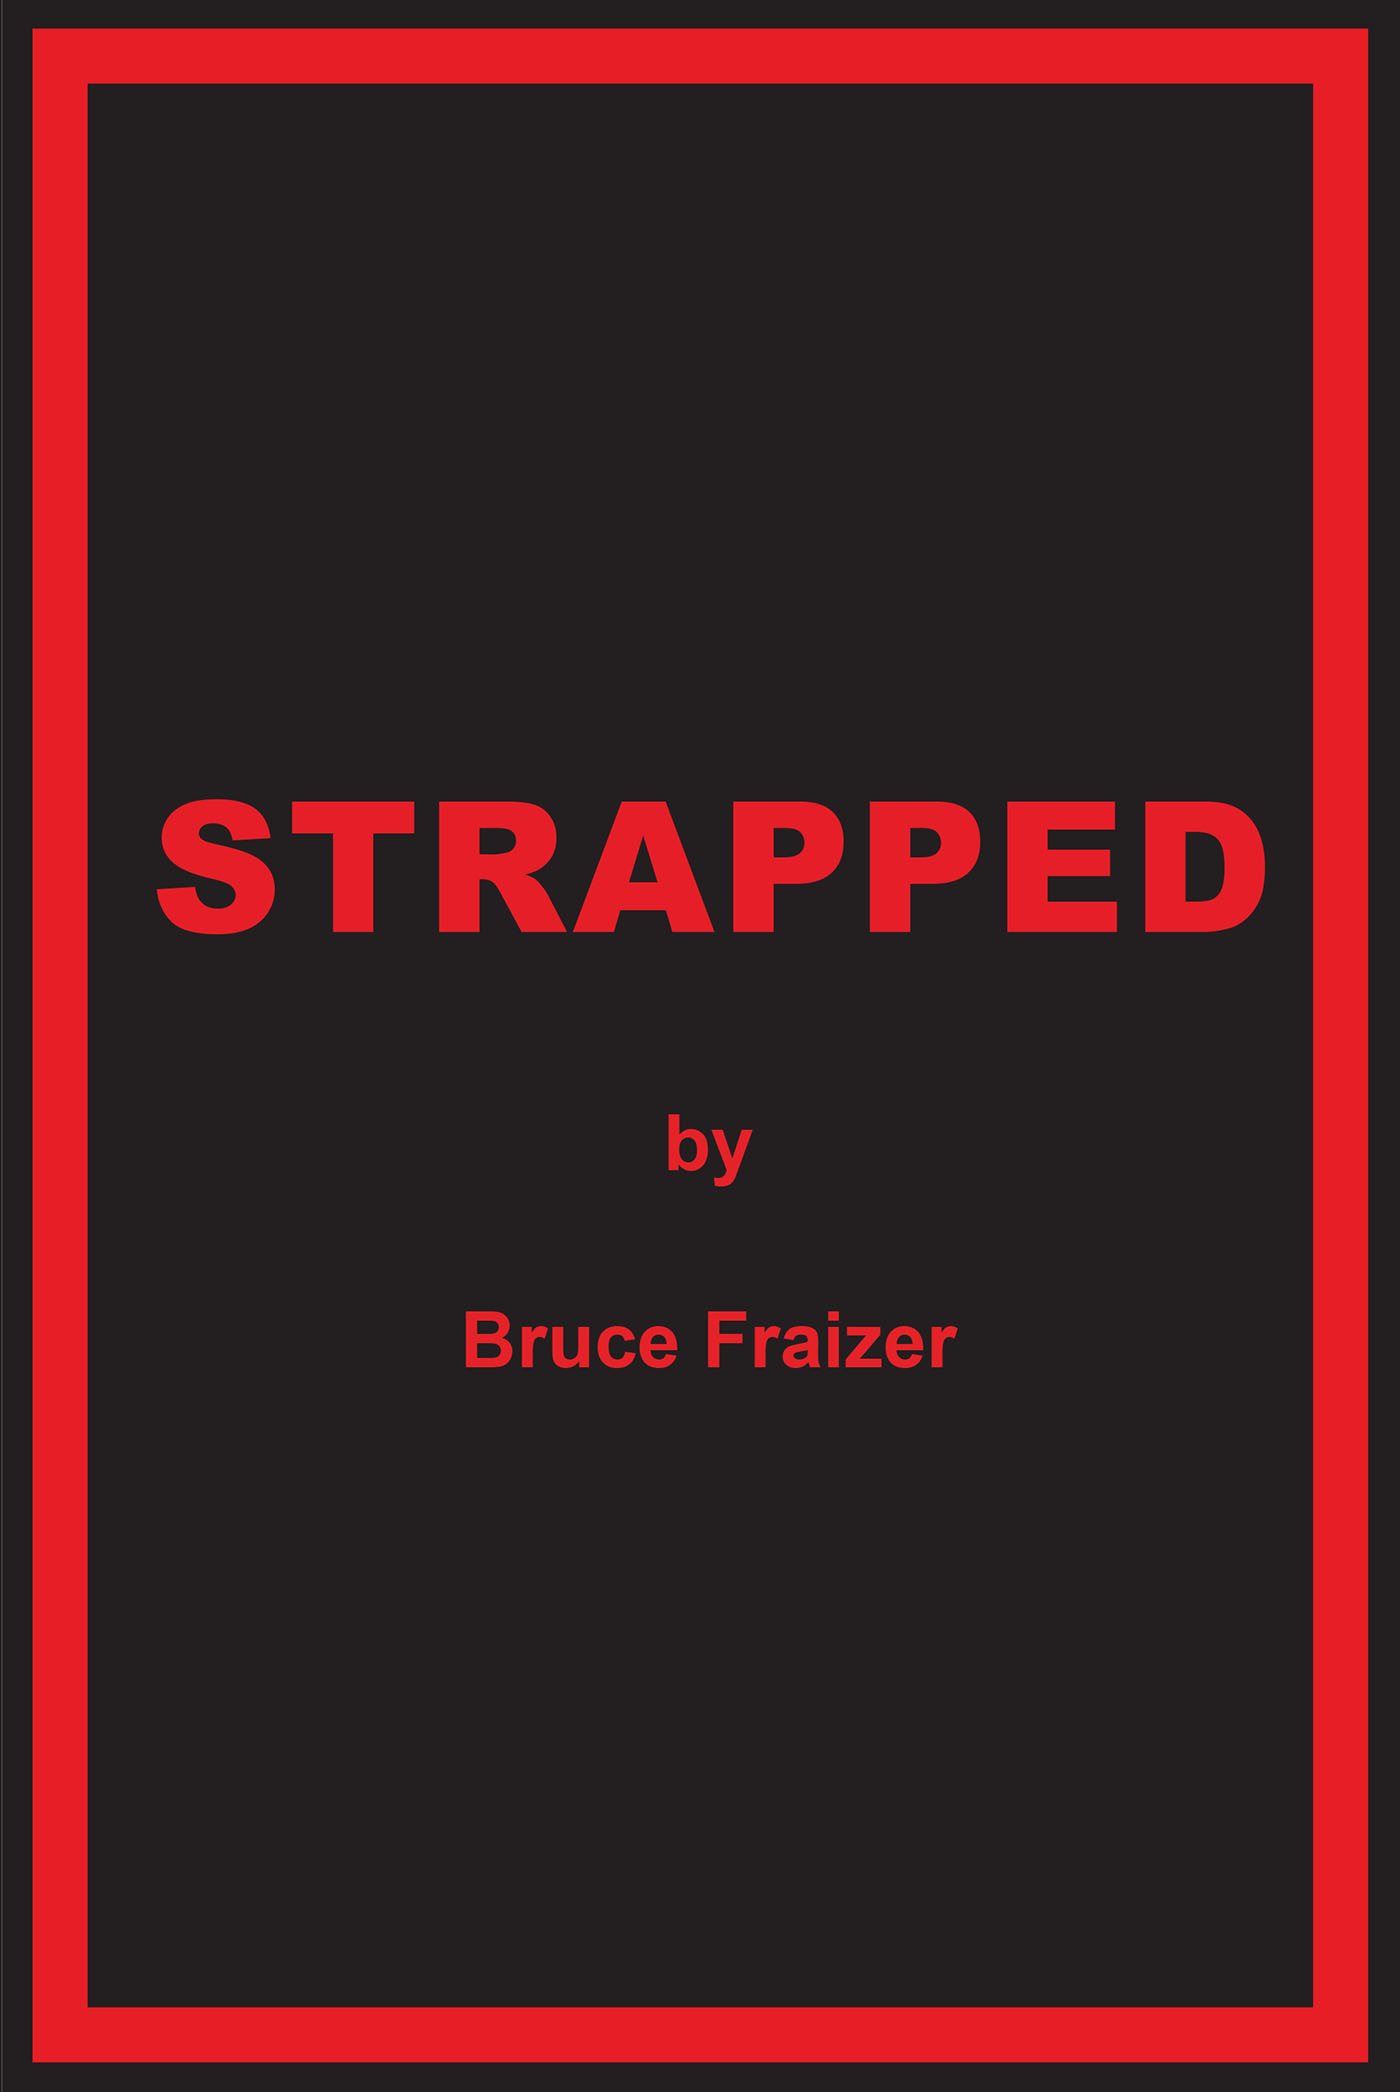 Bruce Fraizer’s New Book, "Strapped," is a Gritty Crime Novel Following a Young Couple as They Try to Break Free from the Mean Streets of New York City in the 1970s